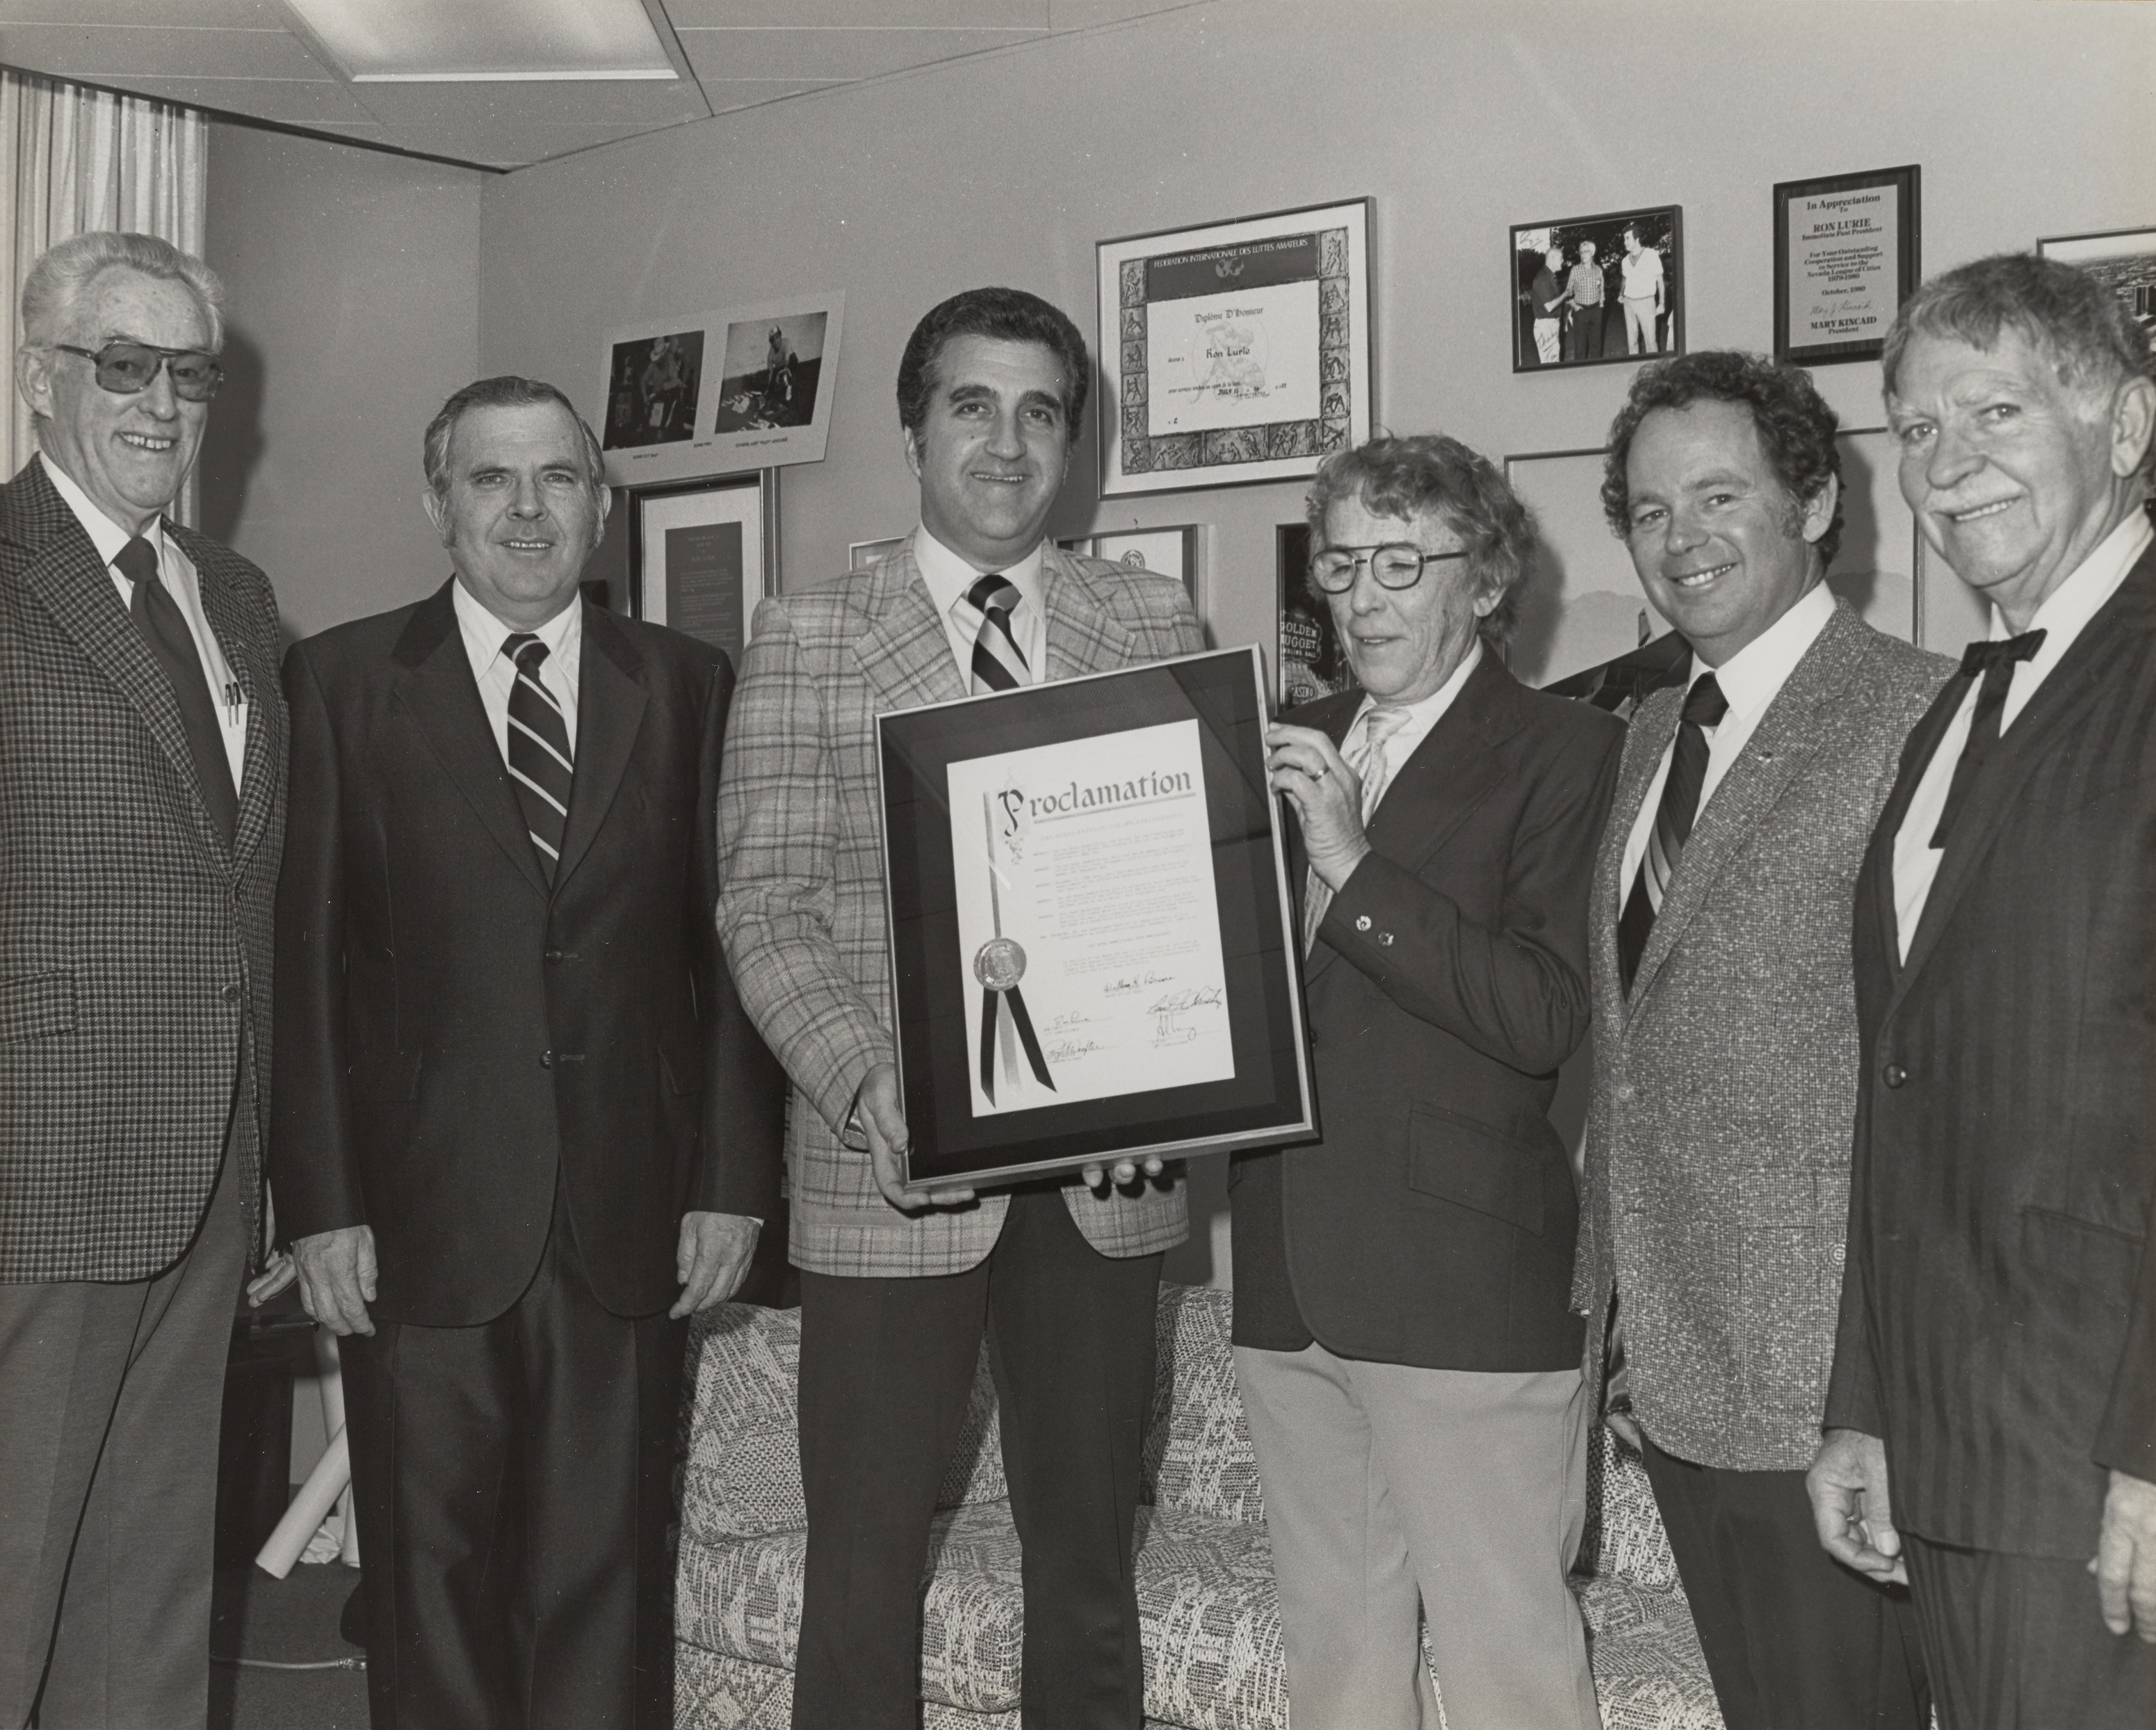 Photograph of Ron Lurie giving Proclamation